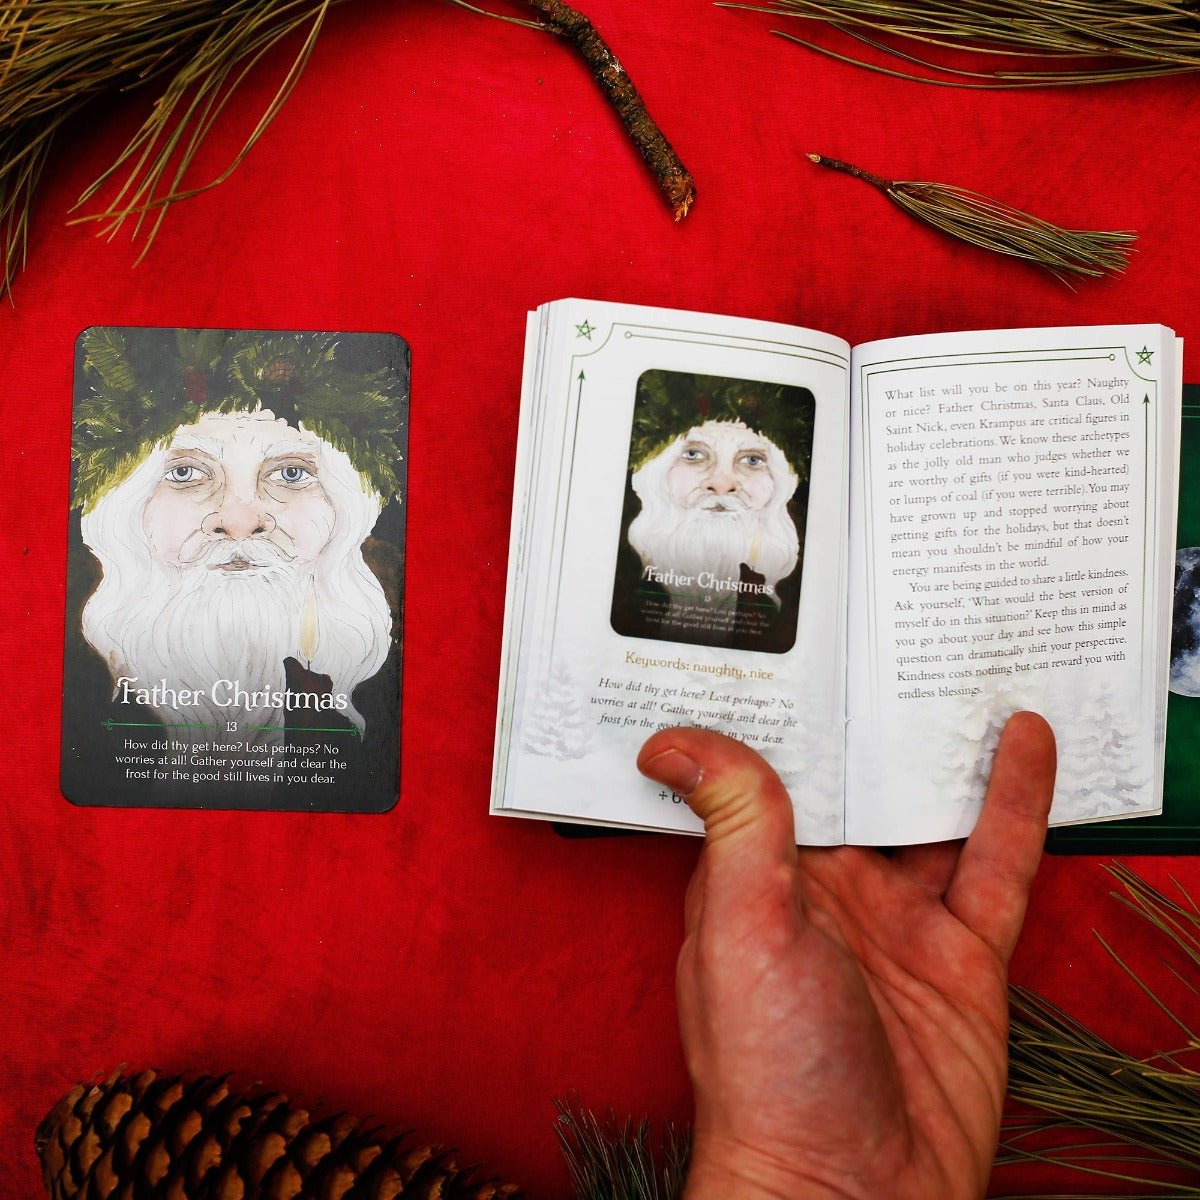 Seasons of the Witch, Yule Oracle Deck - 13 Moons